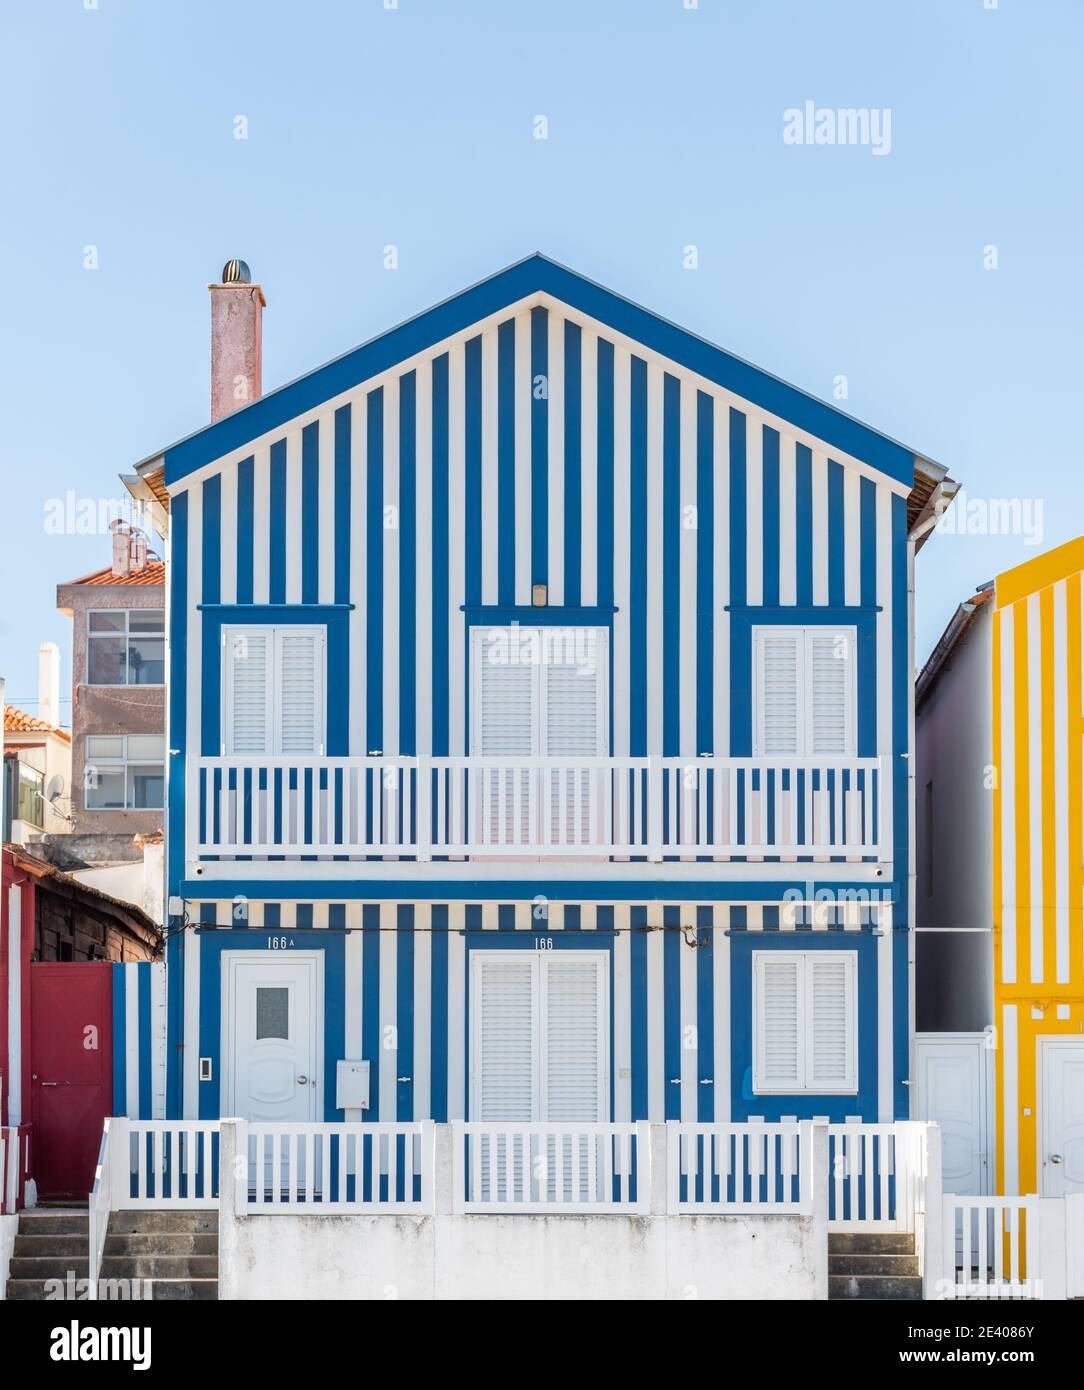 colorful image Typical stripes Houses in Costa Nova, Aveiro, Barra, Portugal Stock Photo